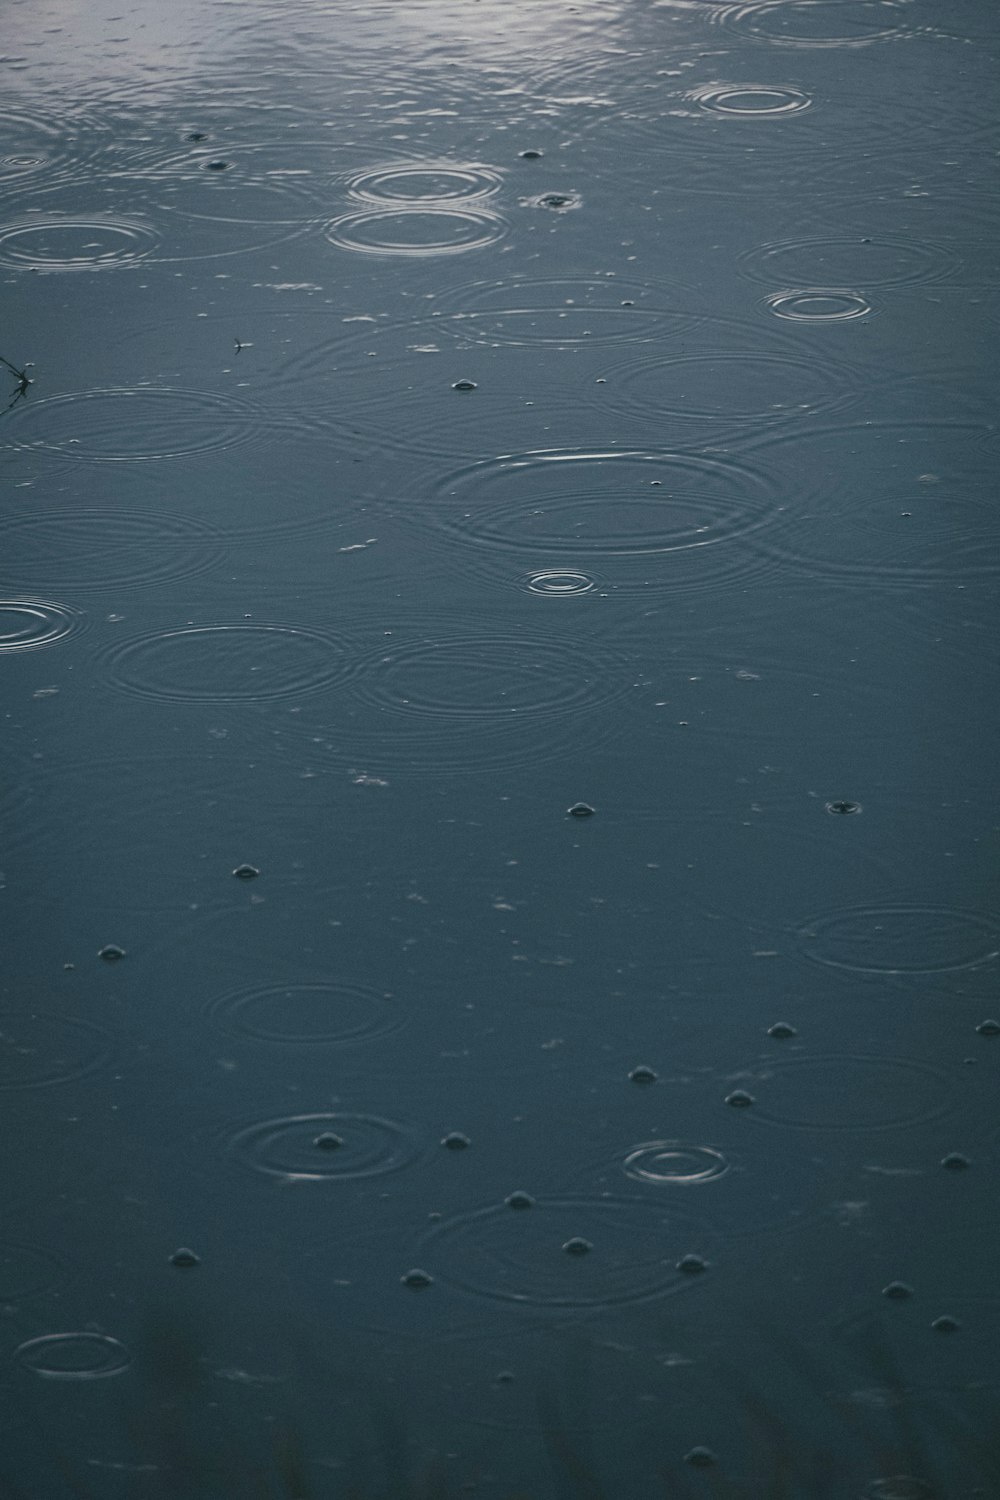 rain drops on the surface of a body of water